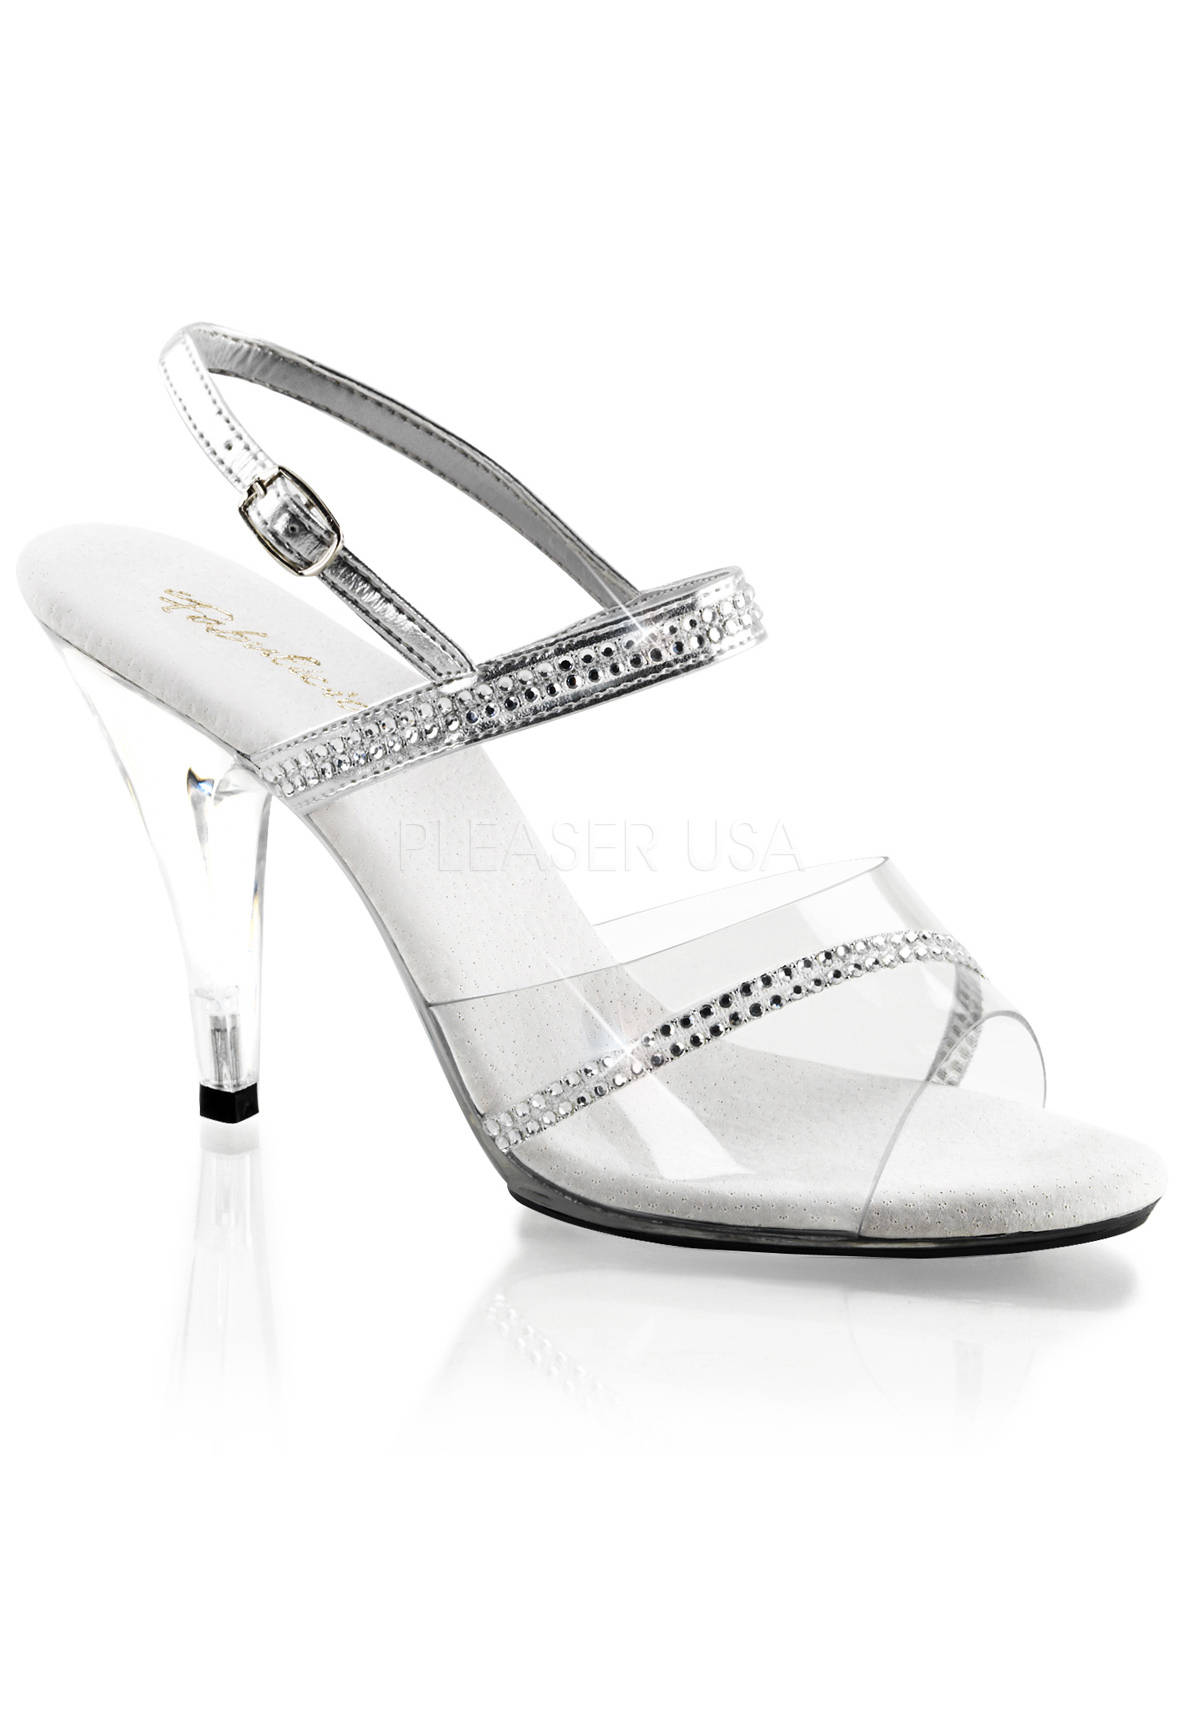 FABULICIOUS 4 Inch Heel Slide - Clear/Clear